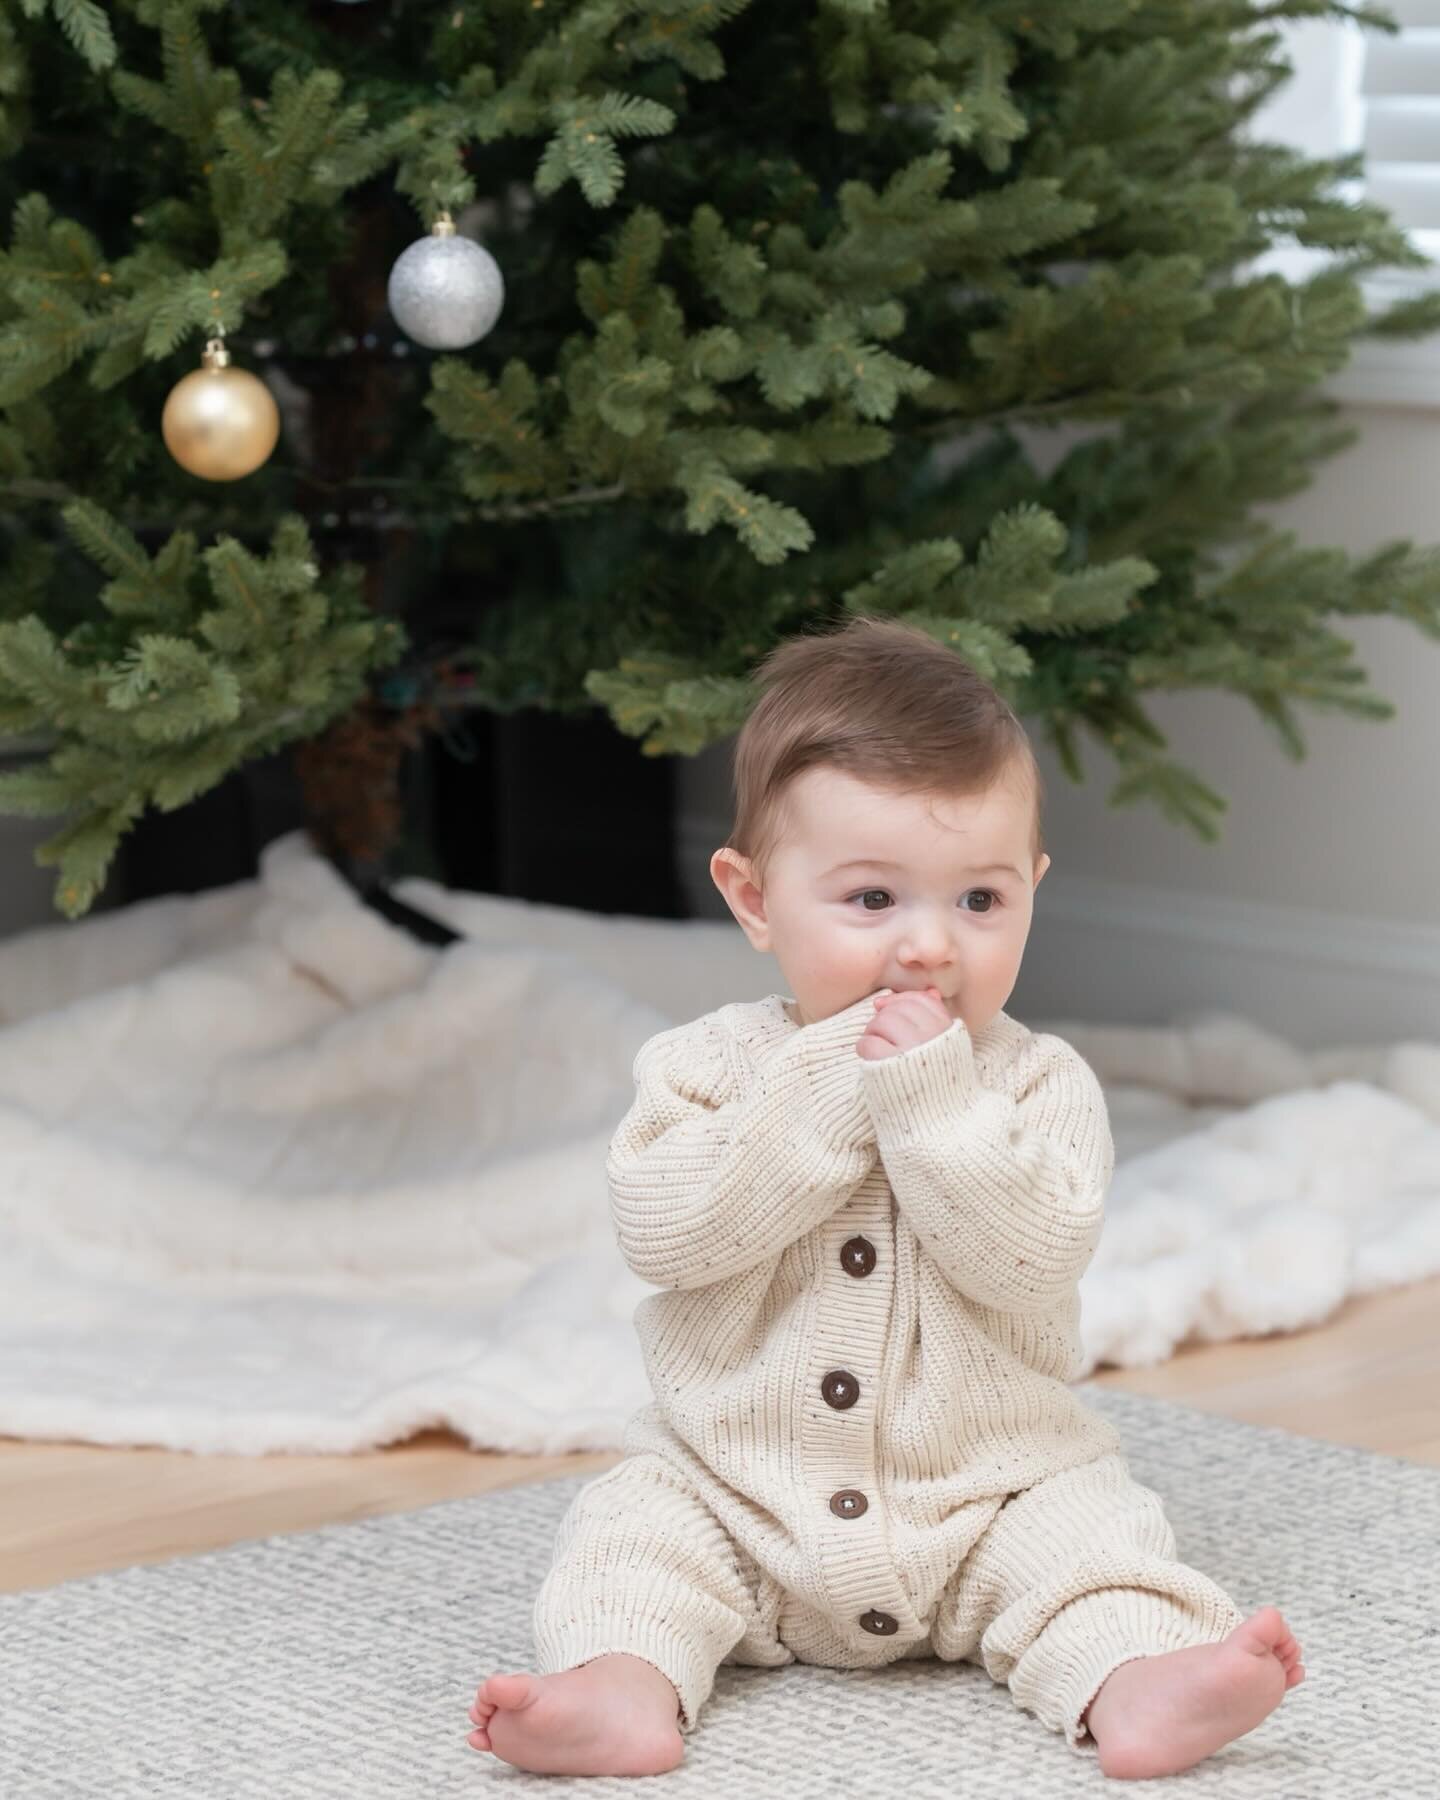 Just the perfect 7 month old, Christmas, outdoor, nursery session! It was really fun to take so many different types of photos in an hour 😀